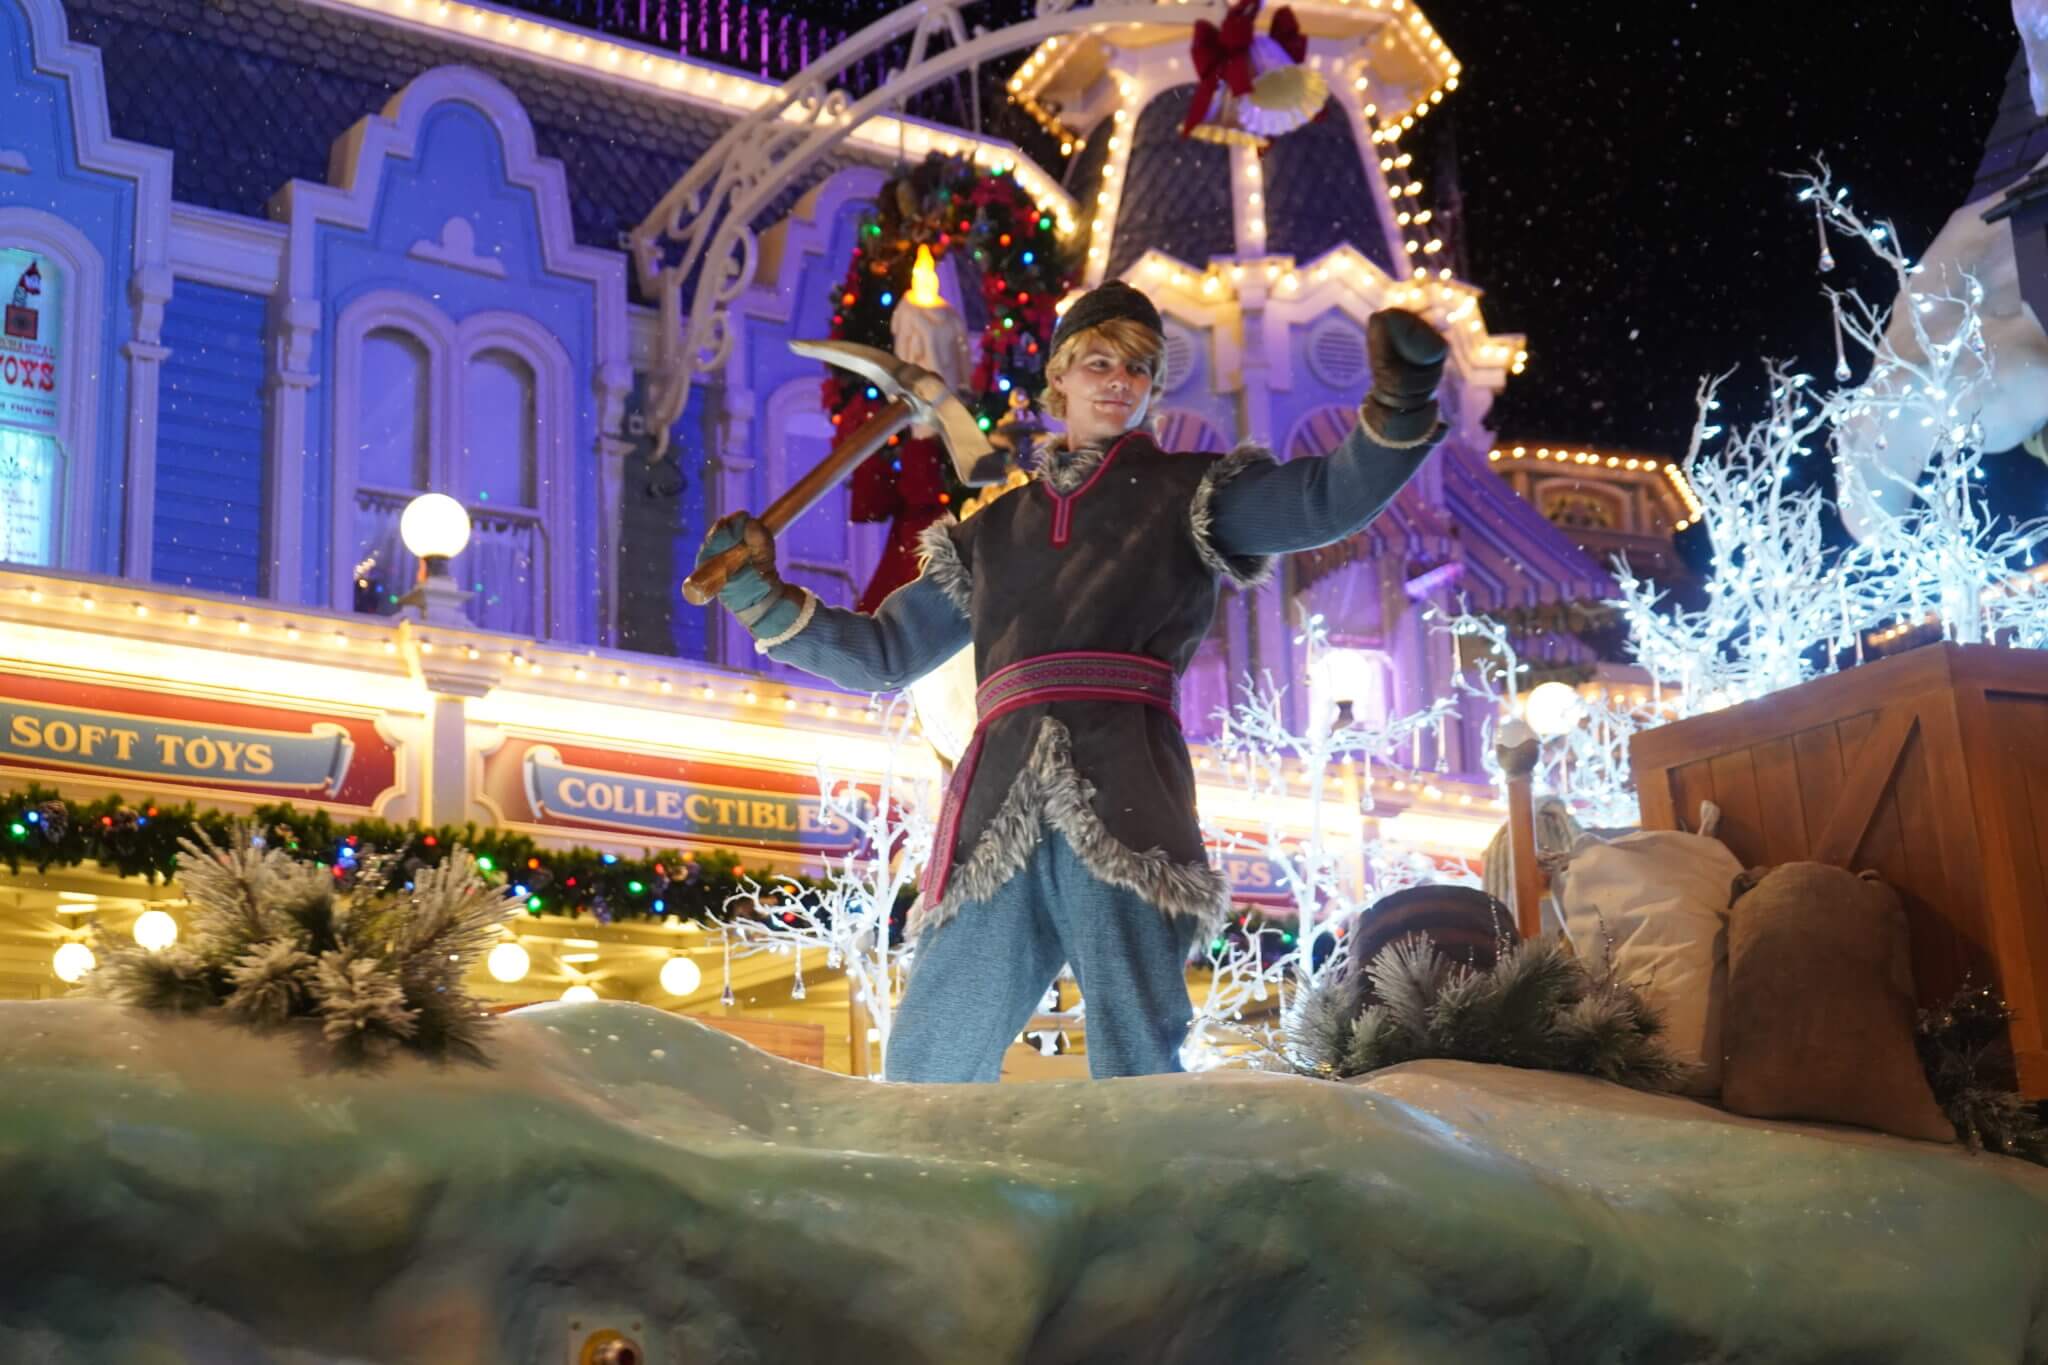 Kristoff from Frozen in Once Upon a Christmastime Parade on Main Street USA in Disney World